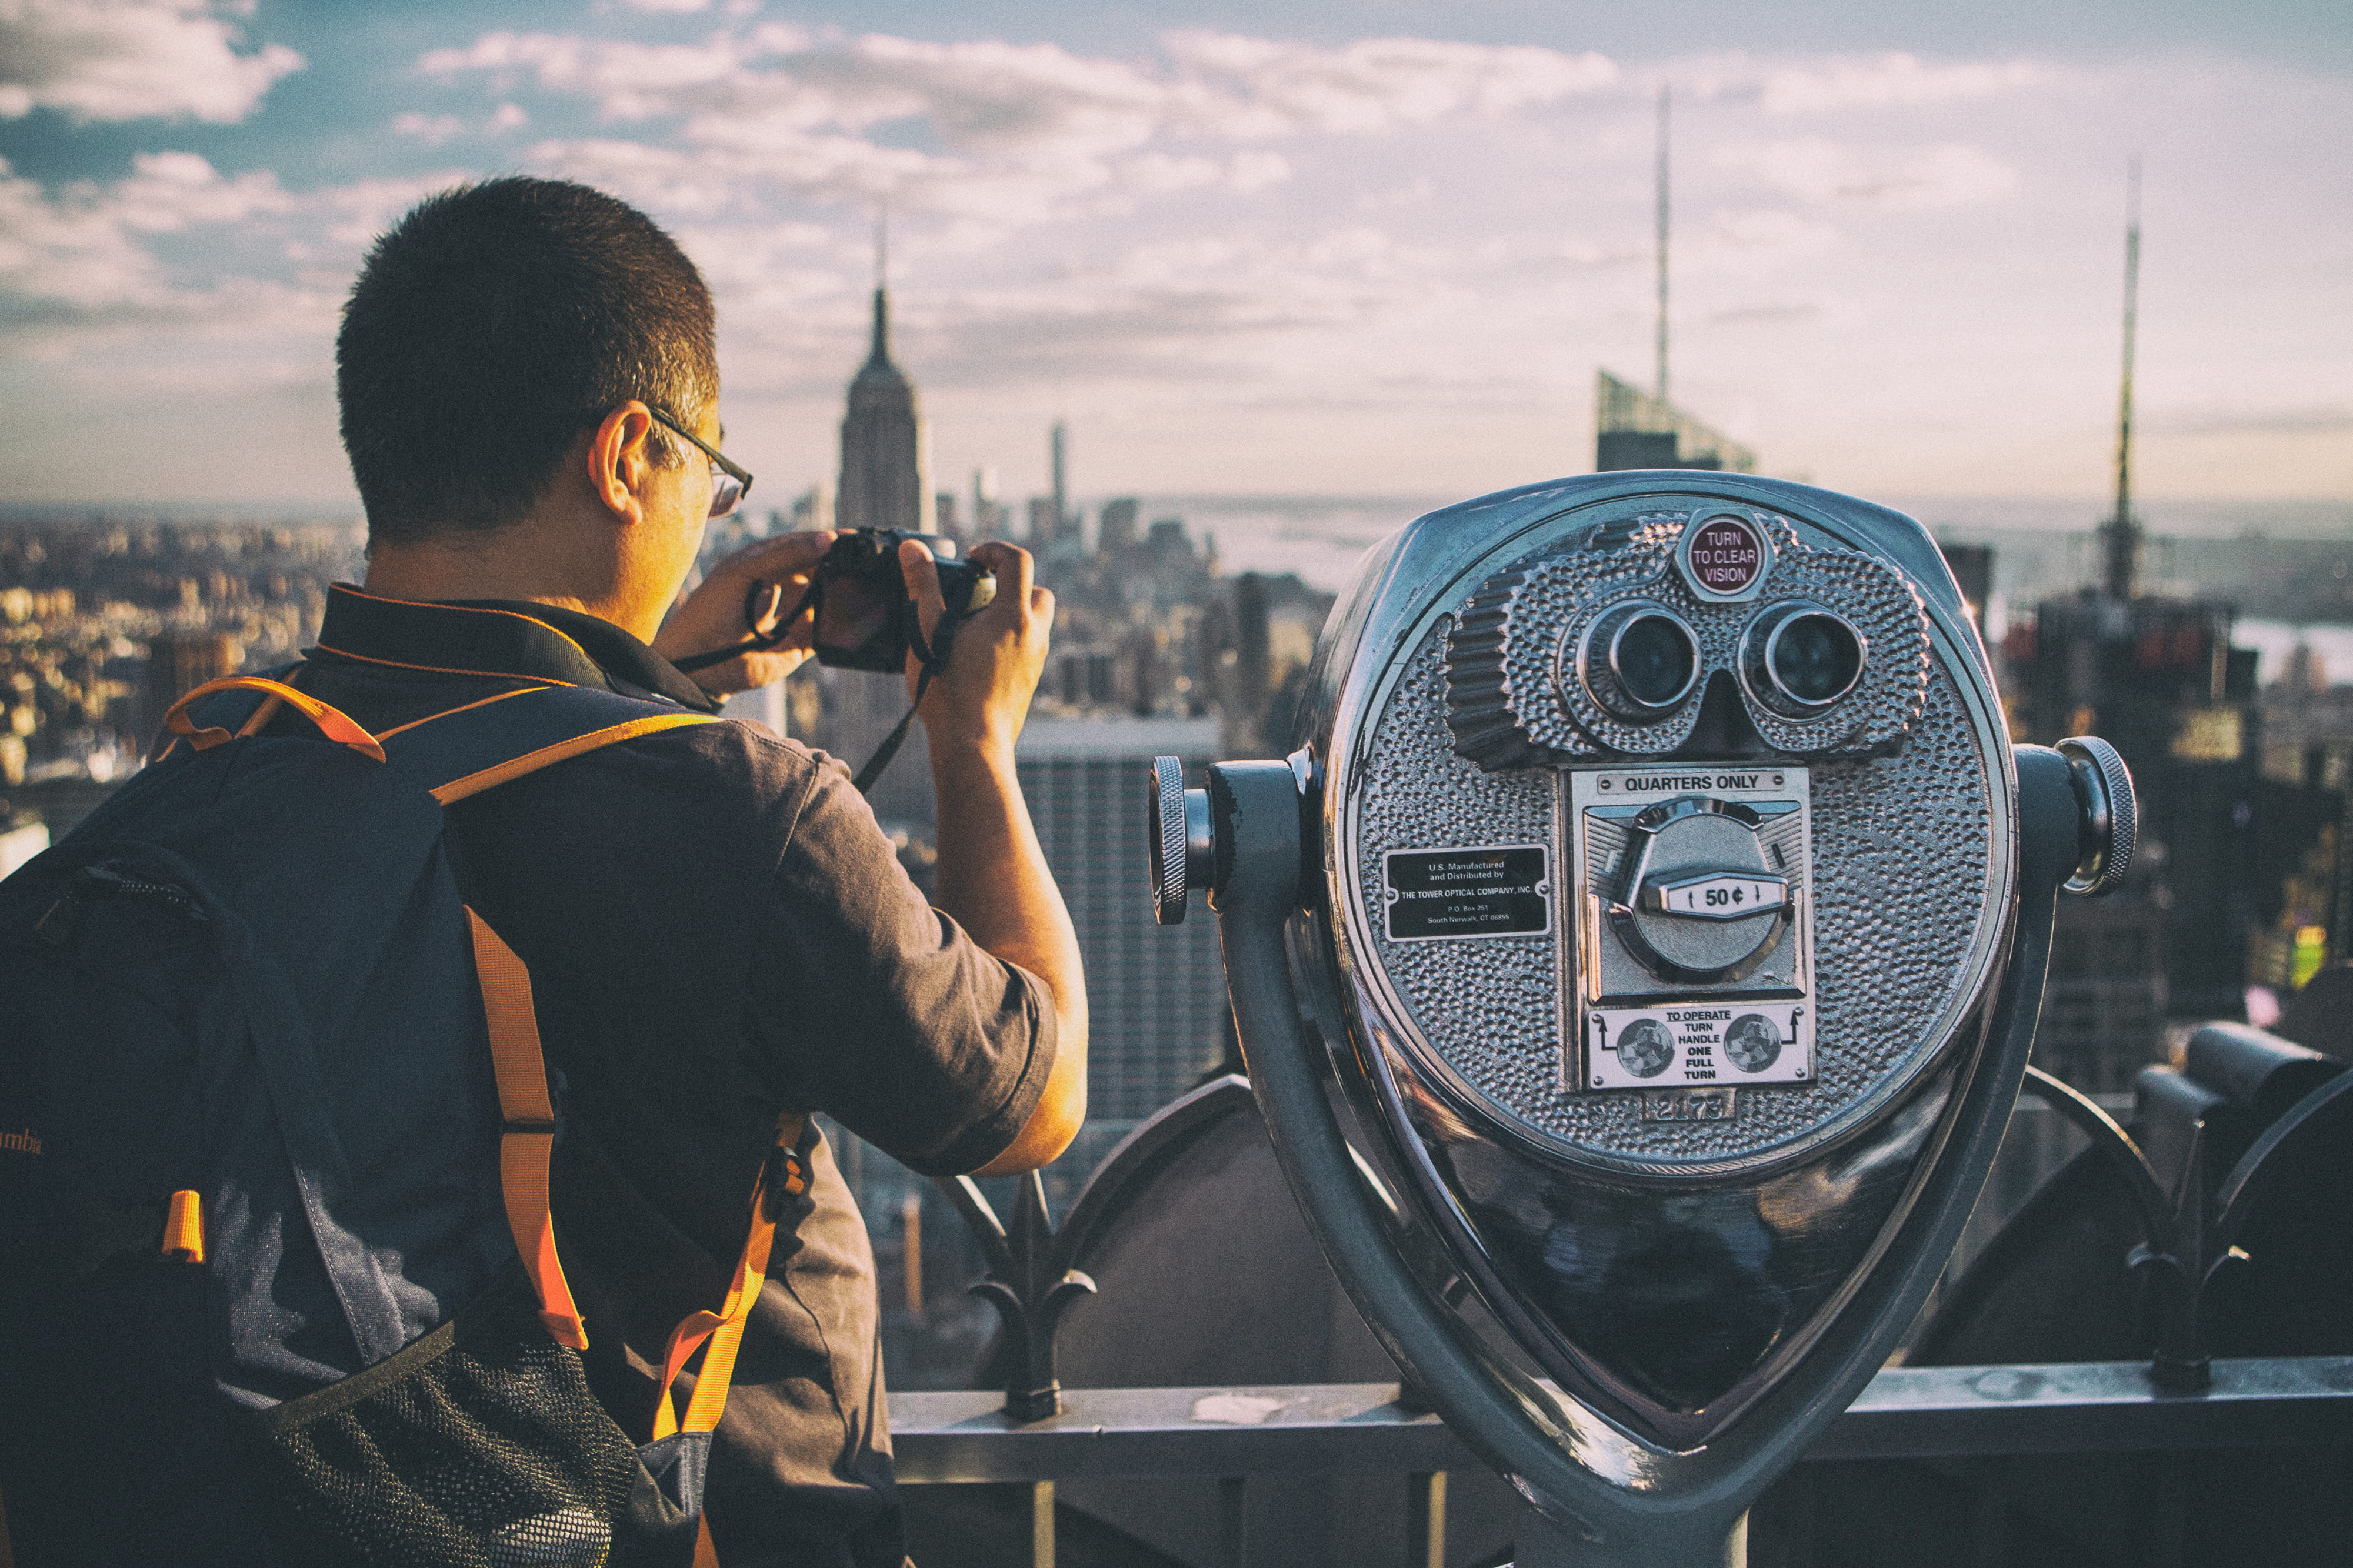 A tourist takes a picture with his camera on the Top Of The Rock observation deck at the famous Rockefeller Center, Manhattan, New York City